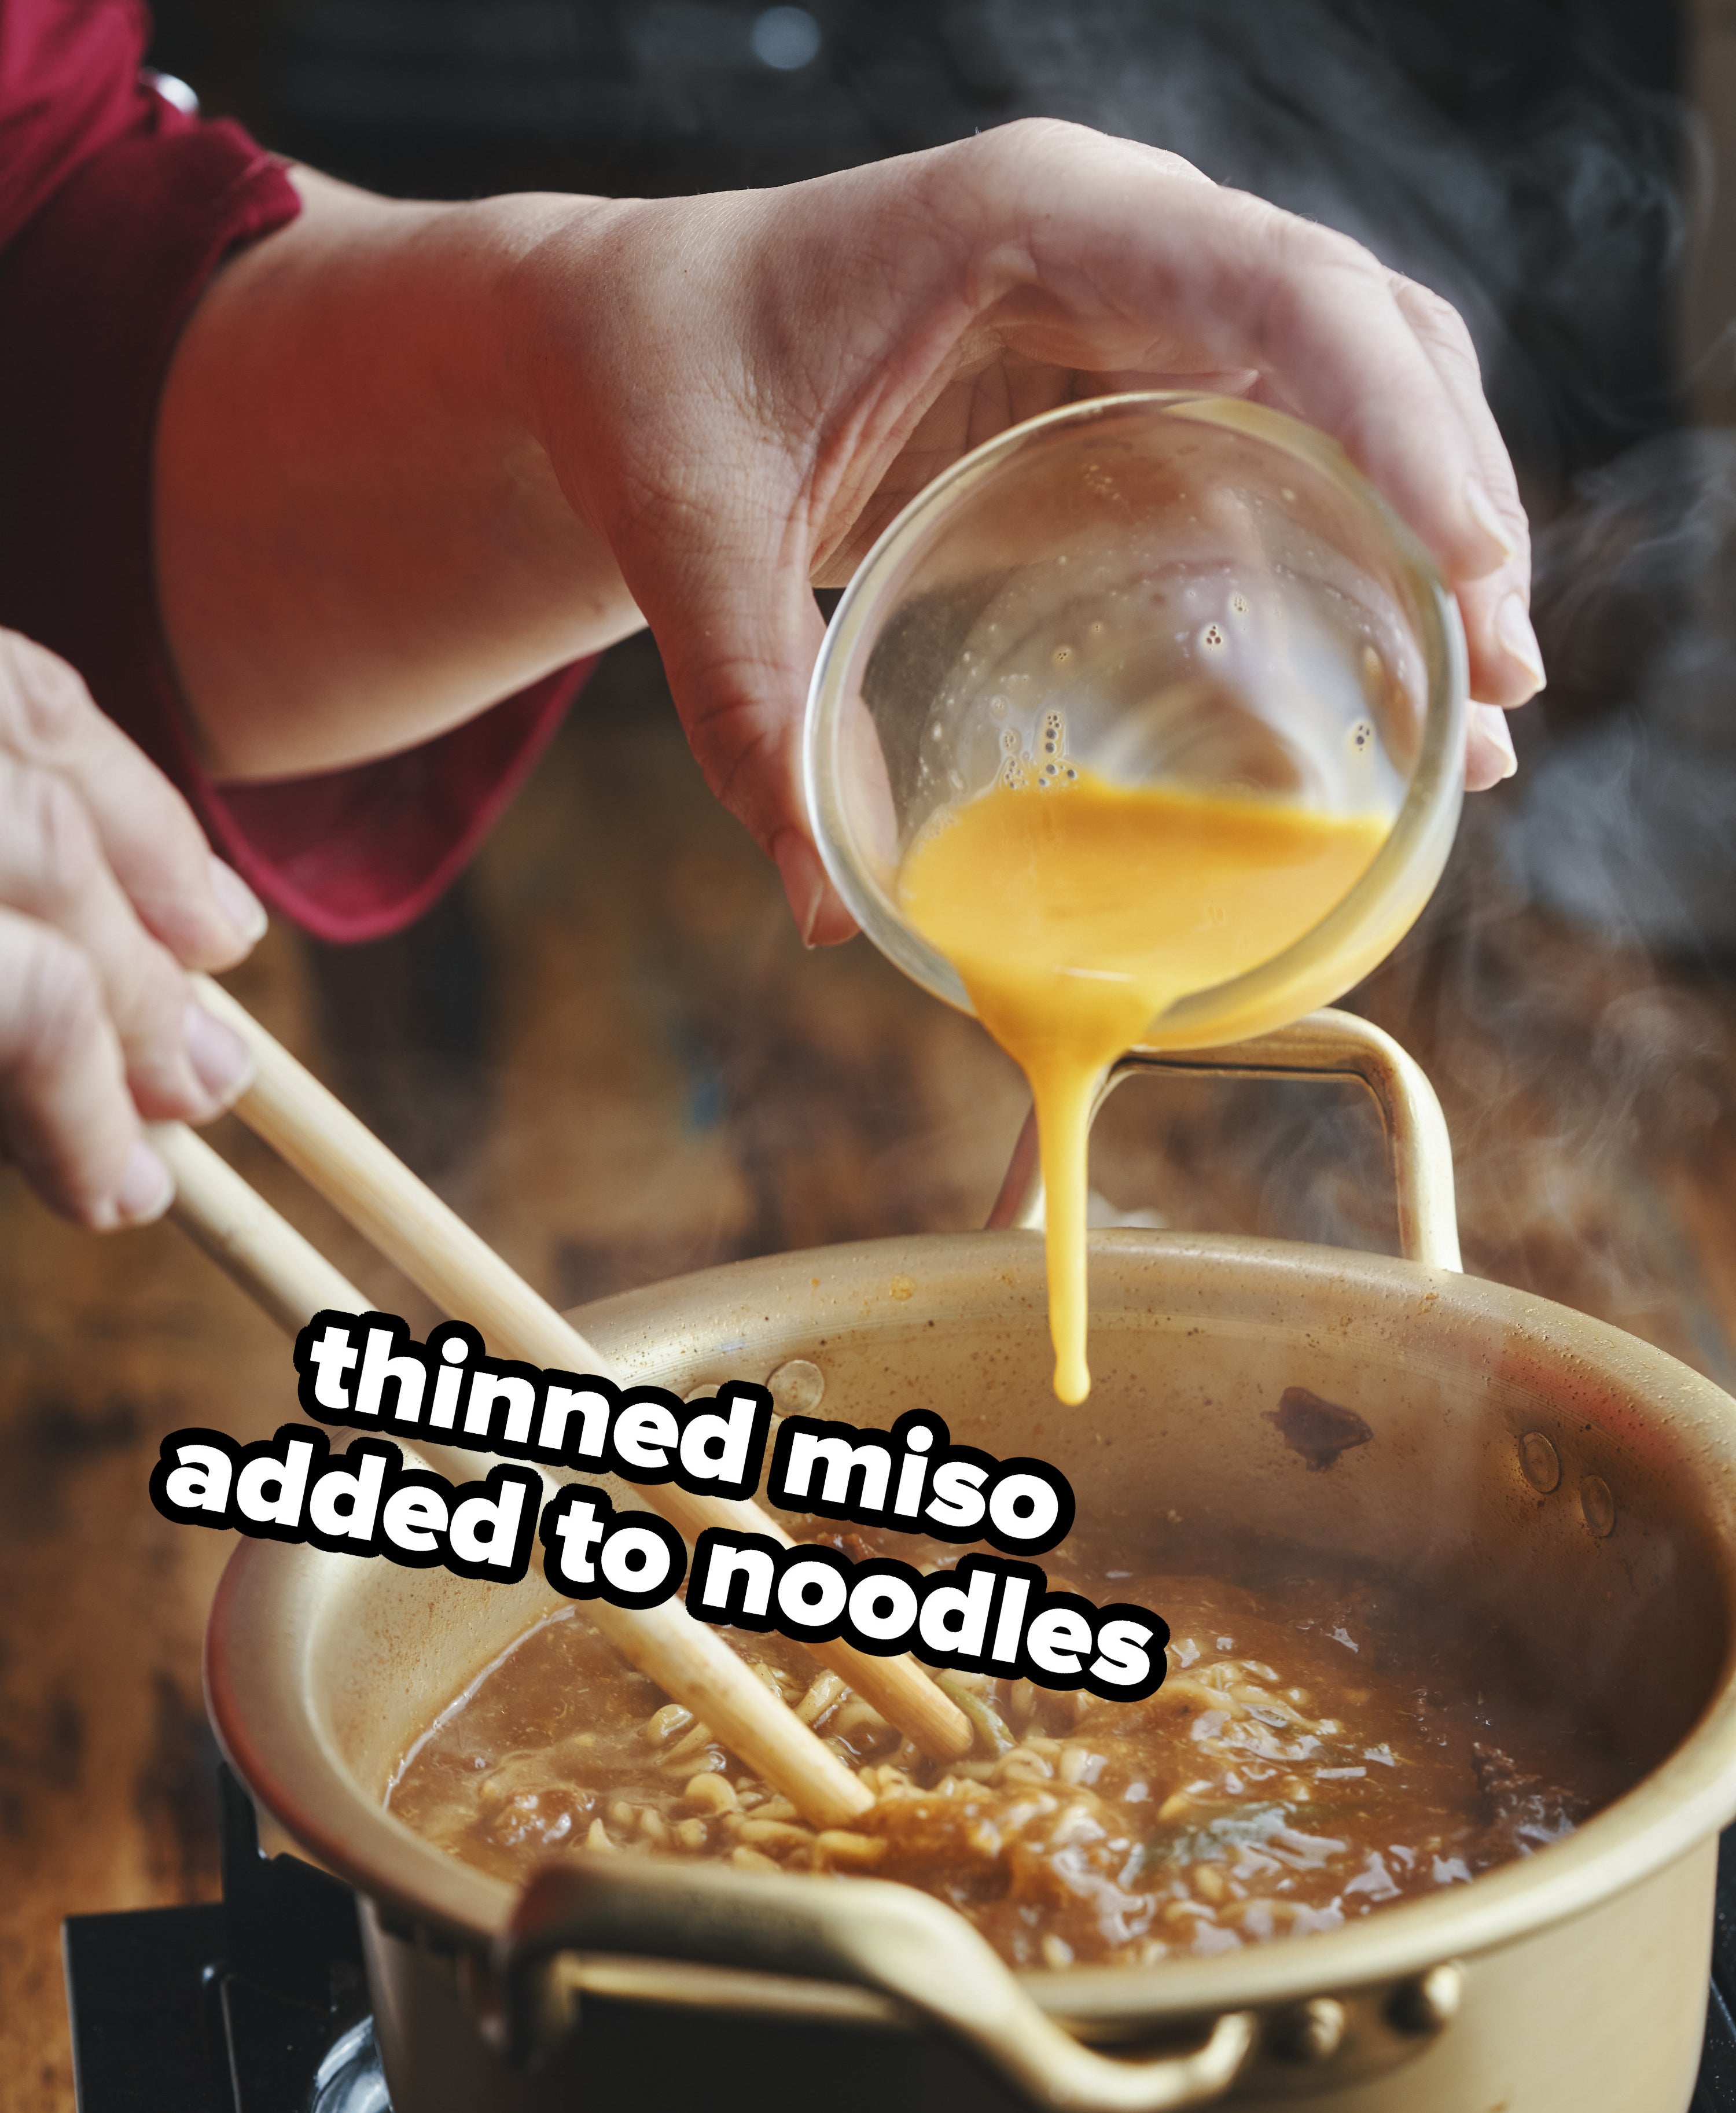 miso being poured into a pot of noodles